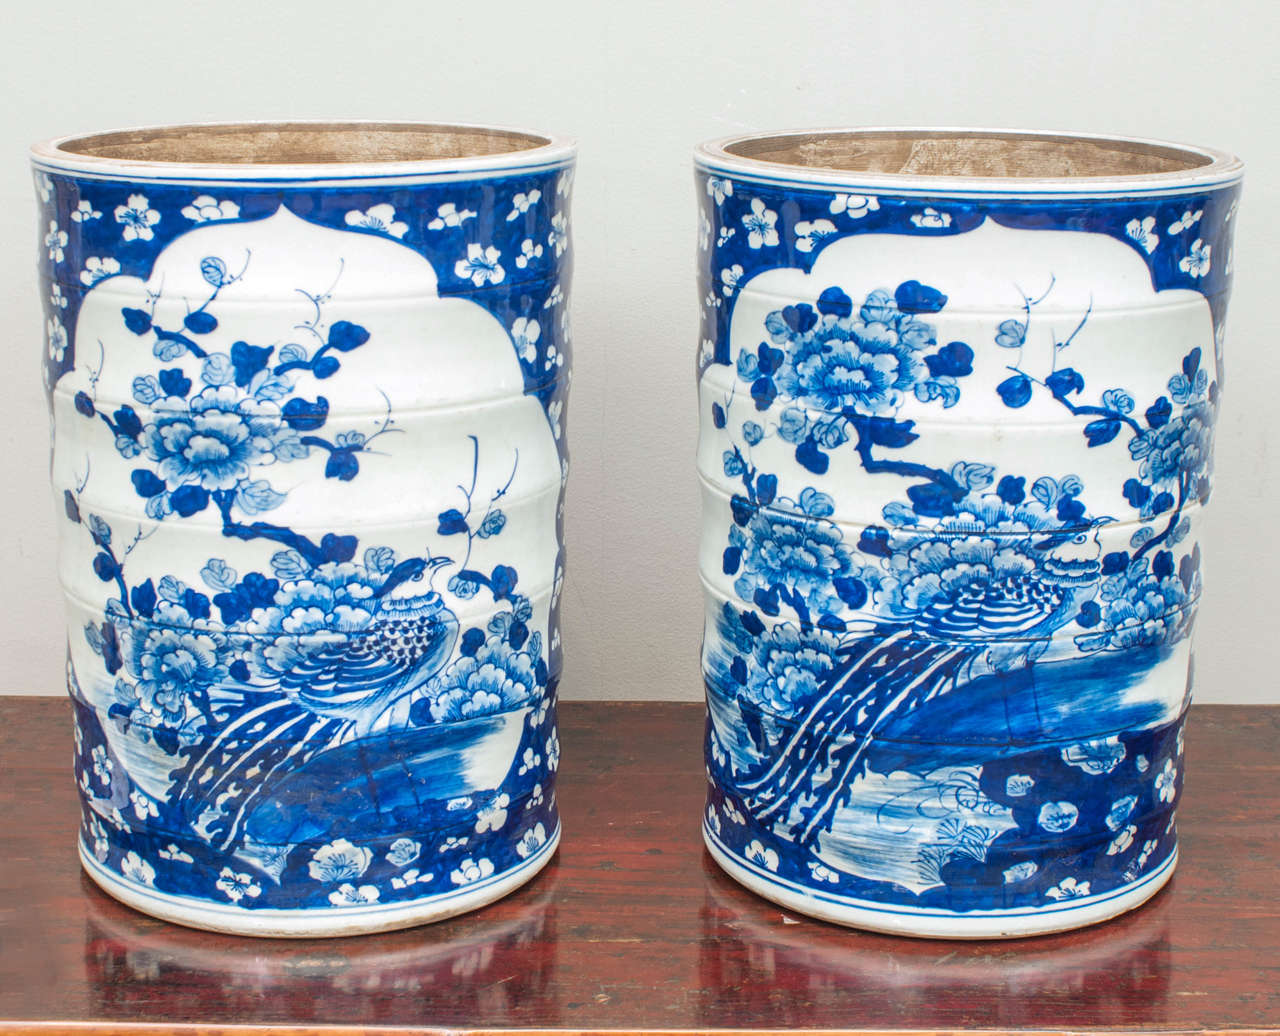 Pair of impressive ribbed jars with traditional Phoenix and Peony motif. Handcrafted in the Jingdezhen region of China, home of the Imperial kilns.